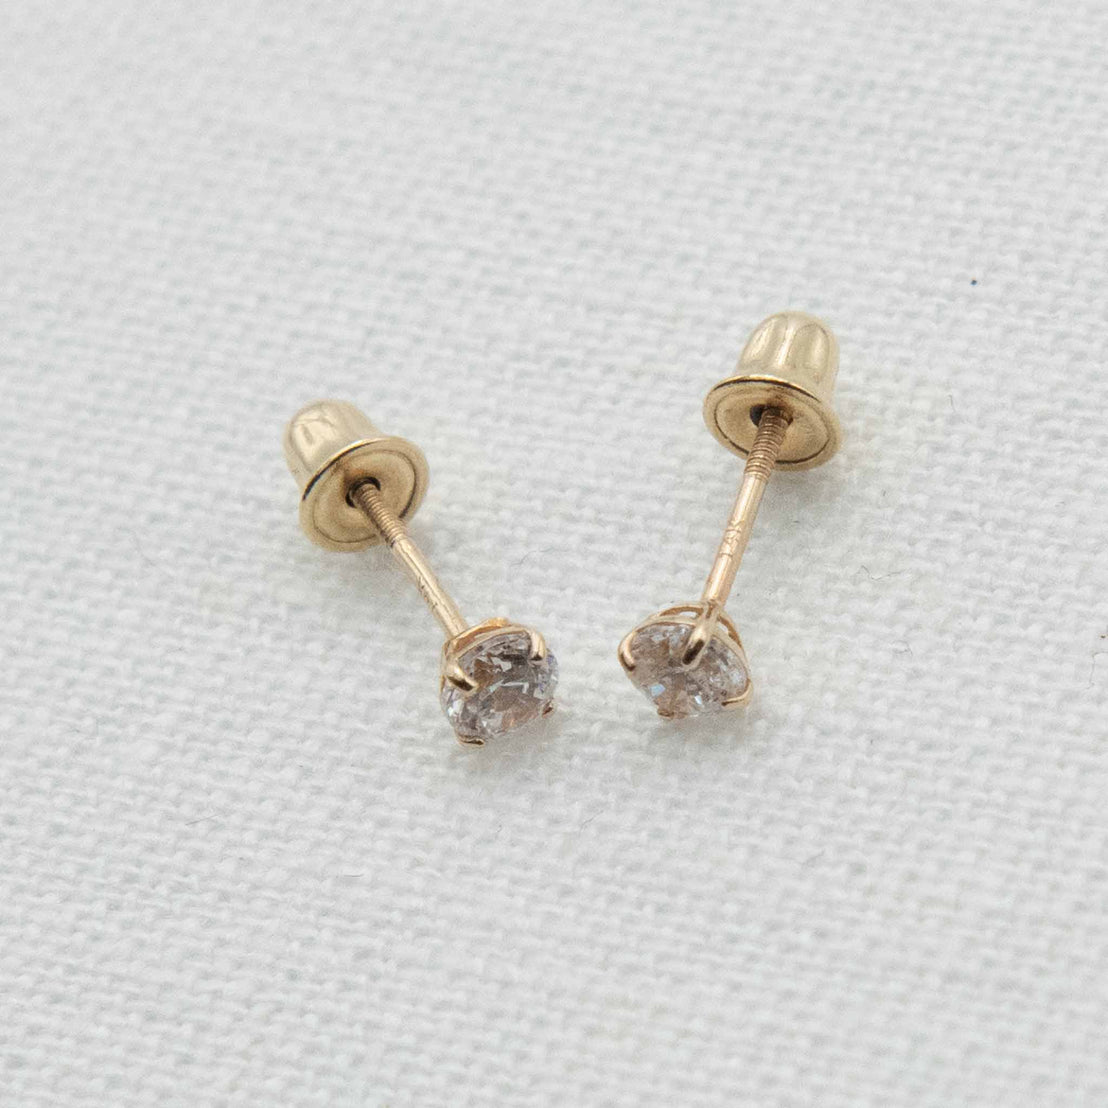 Gold stud earrings with clear stones